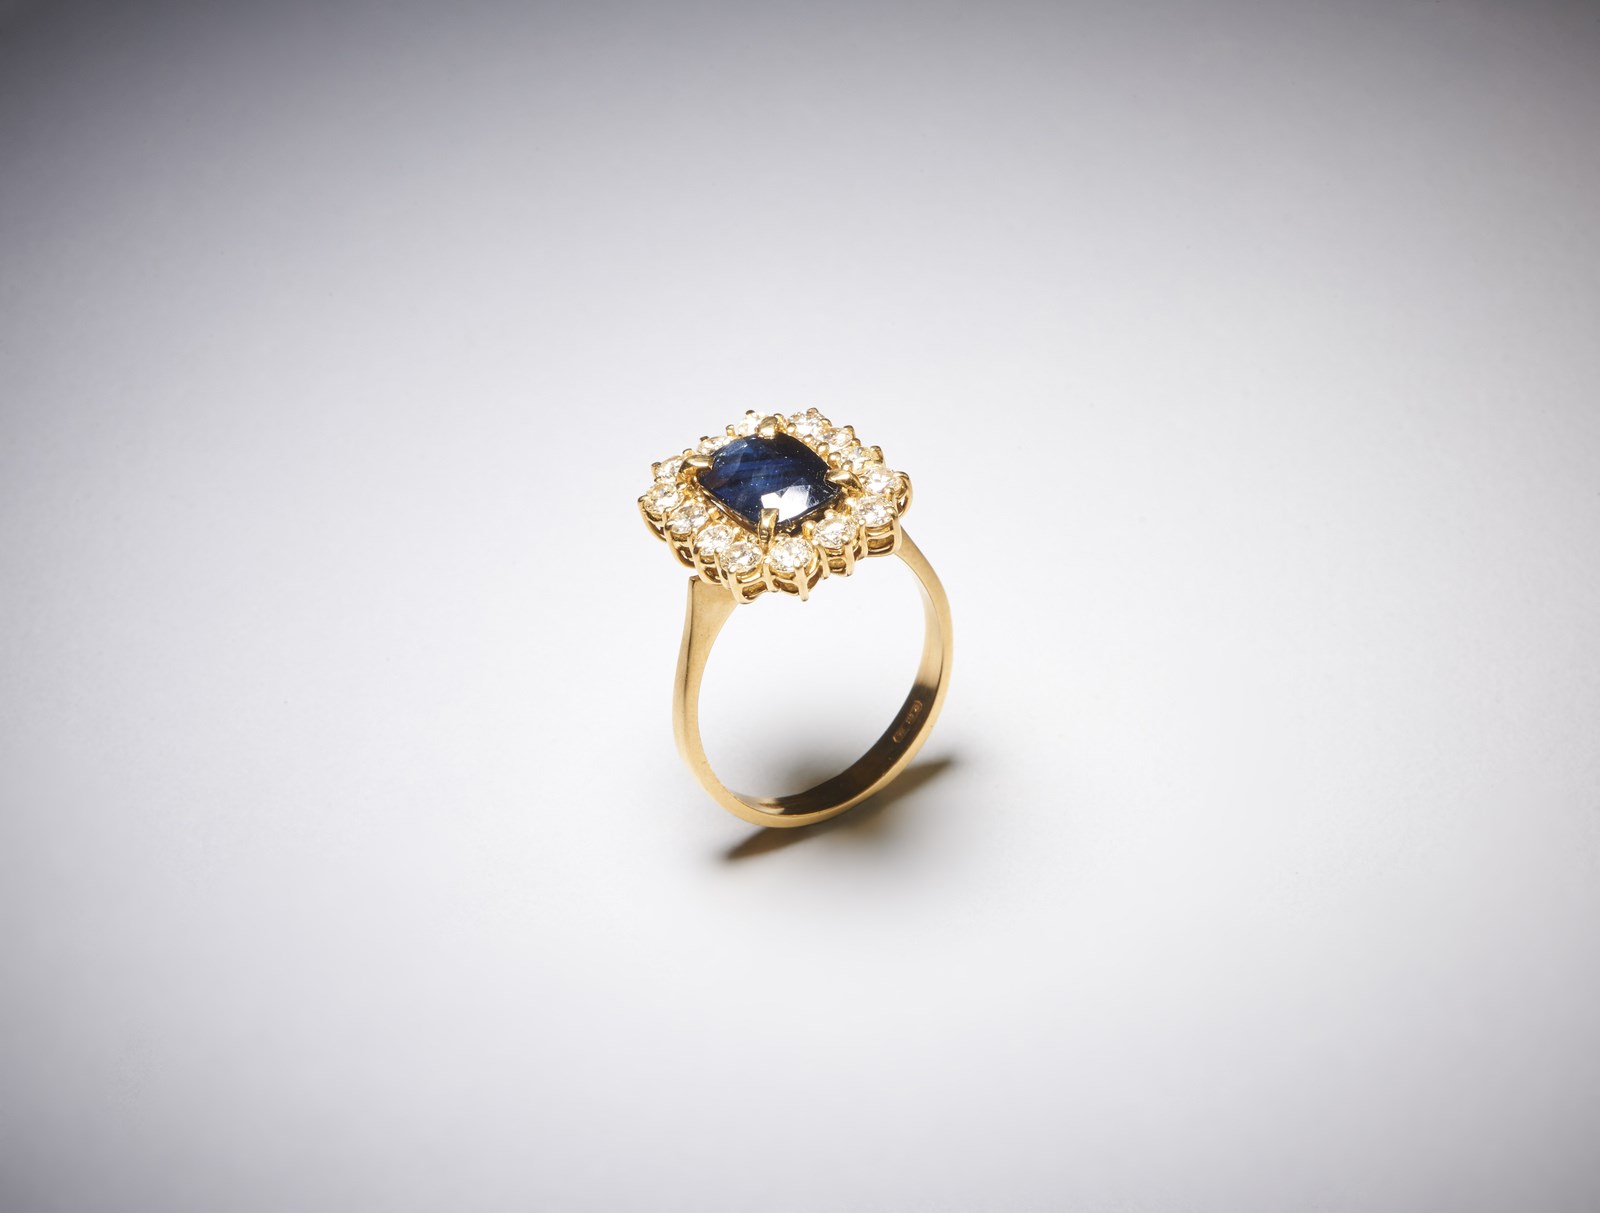 750/1000 yellow gold ring with brilliant cut round diamonds of about 1.00 carats H/I vs and central blue sapphire cushion cut of about 3.00 carats.  (. )